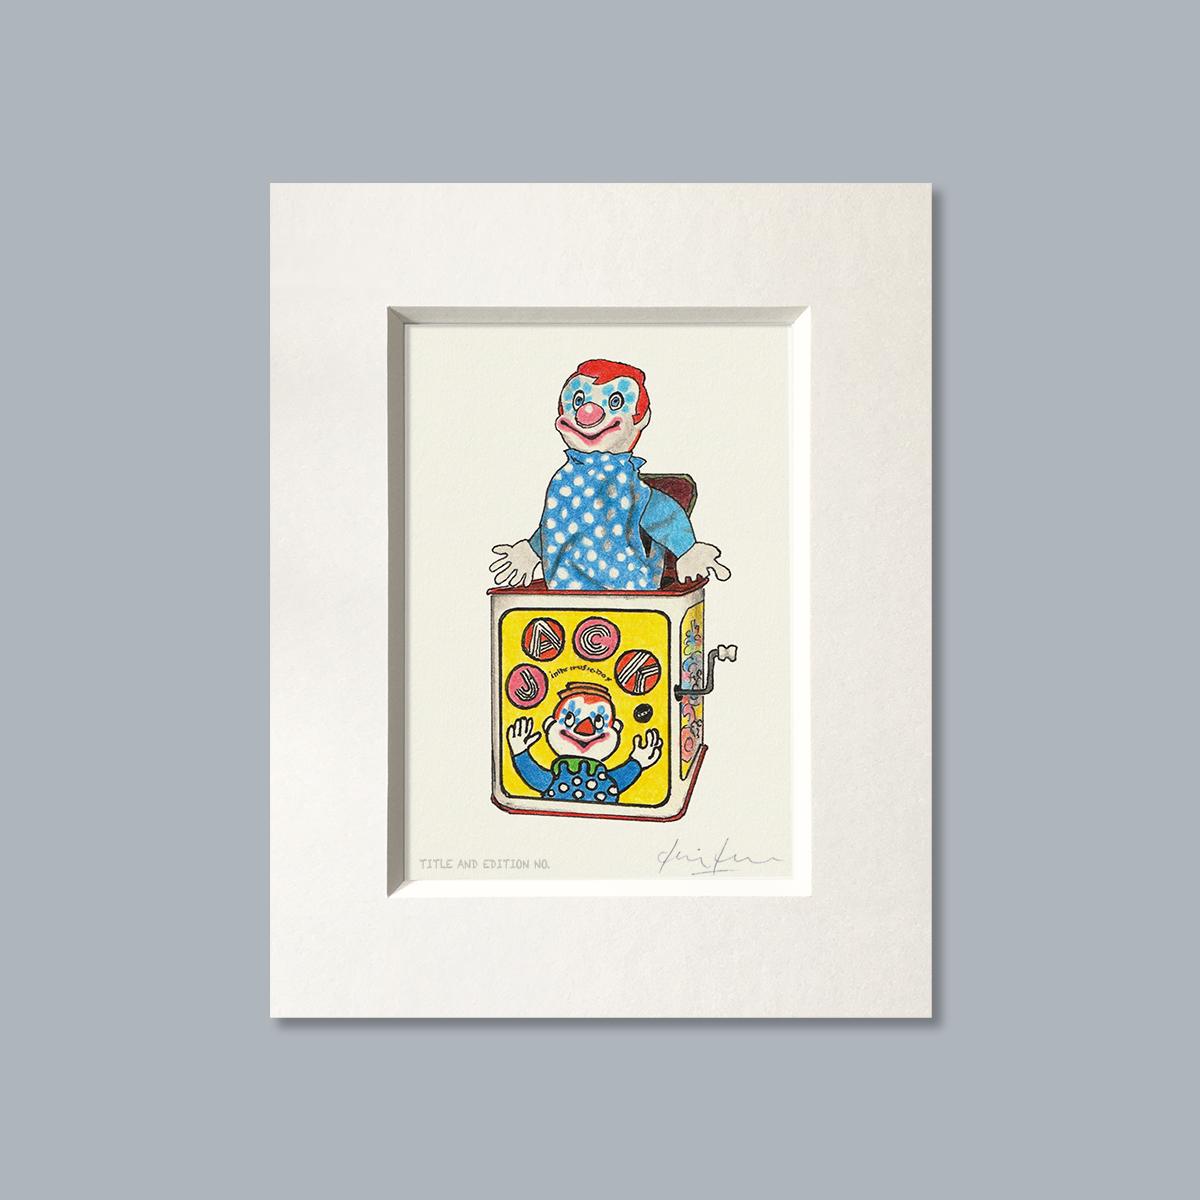 Limited edition print from a pen, ink and coloured pencil drawing of a Jack in the Box in a white mount